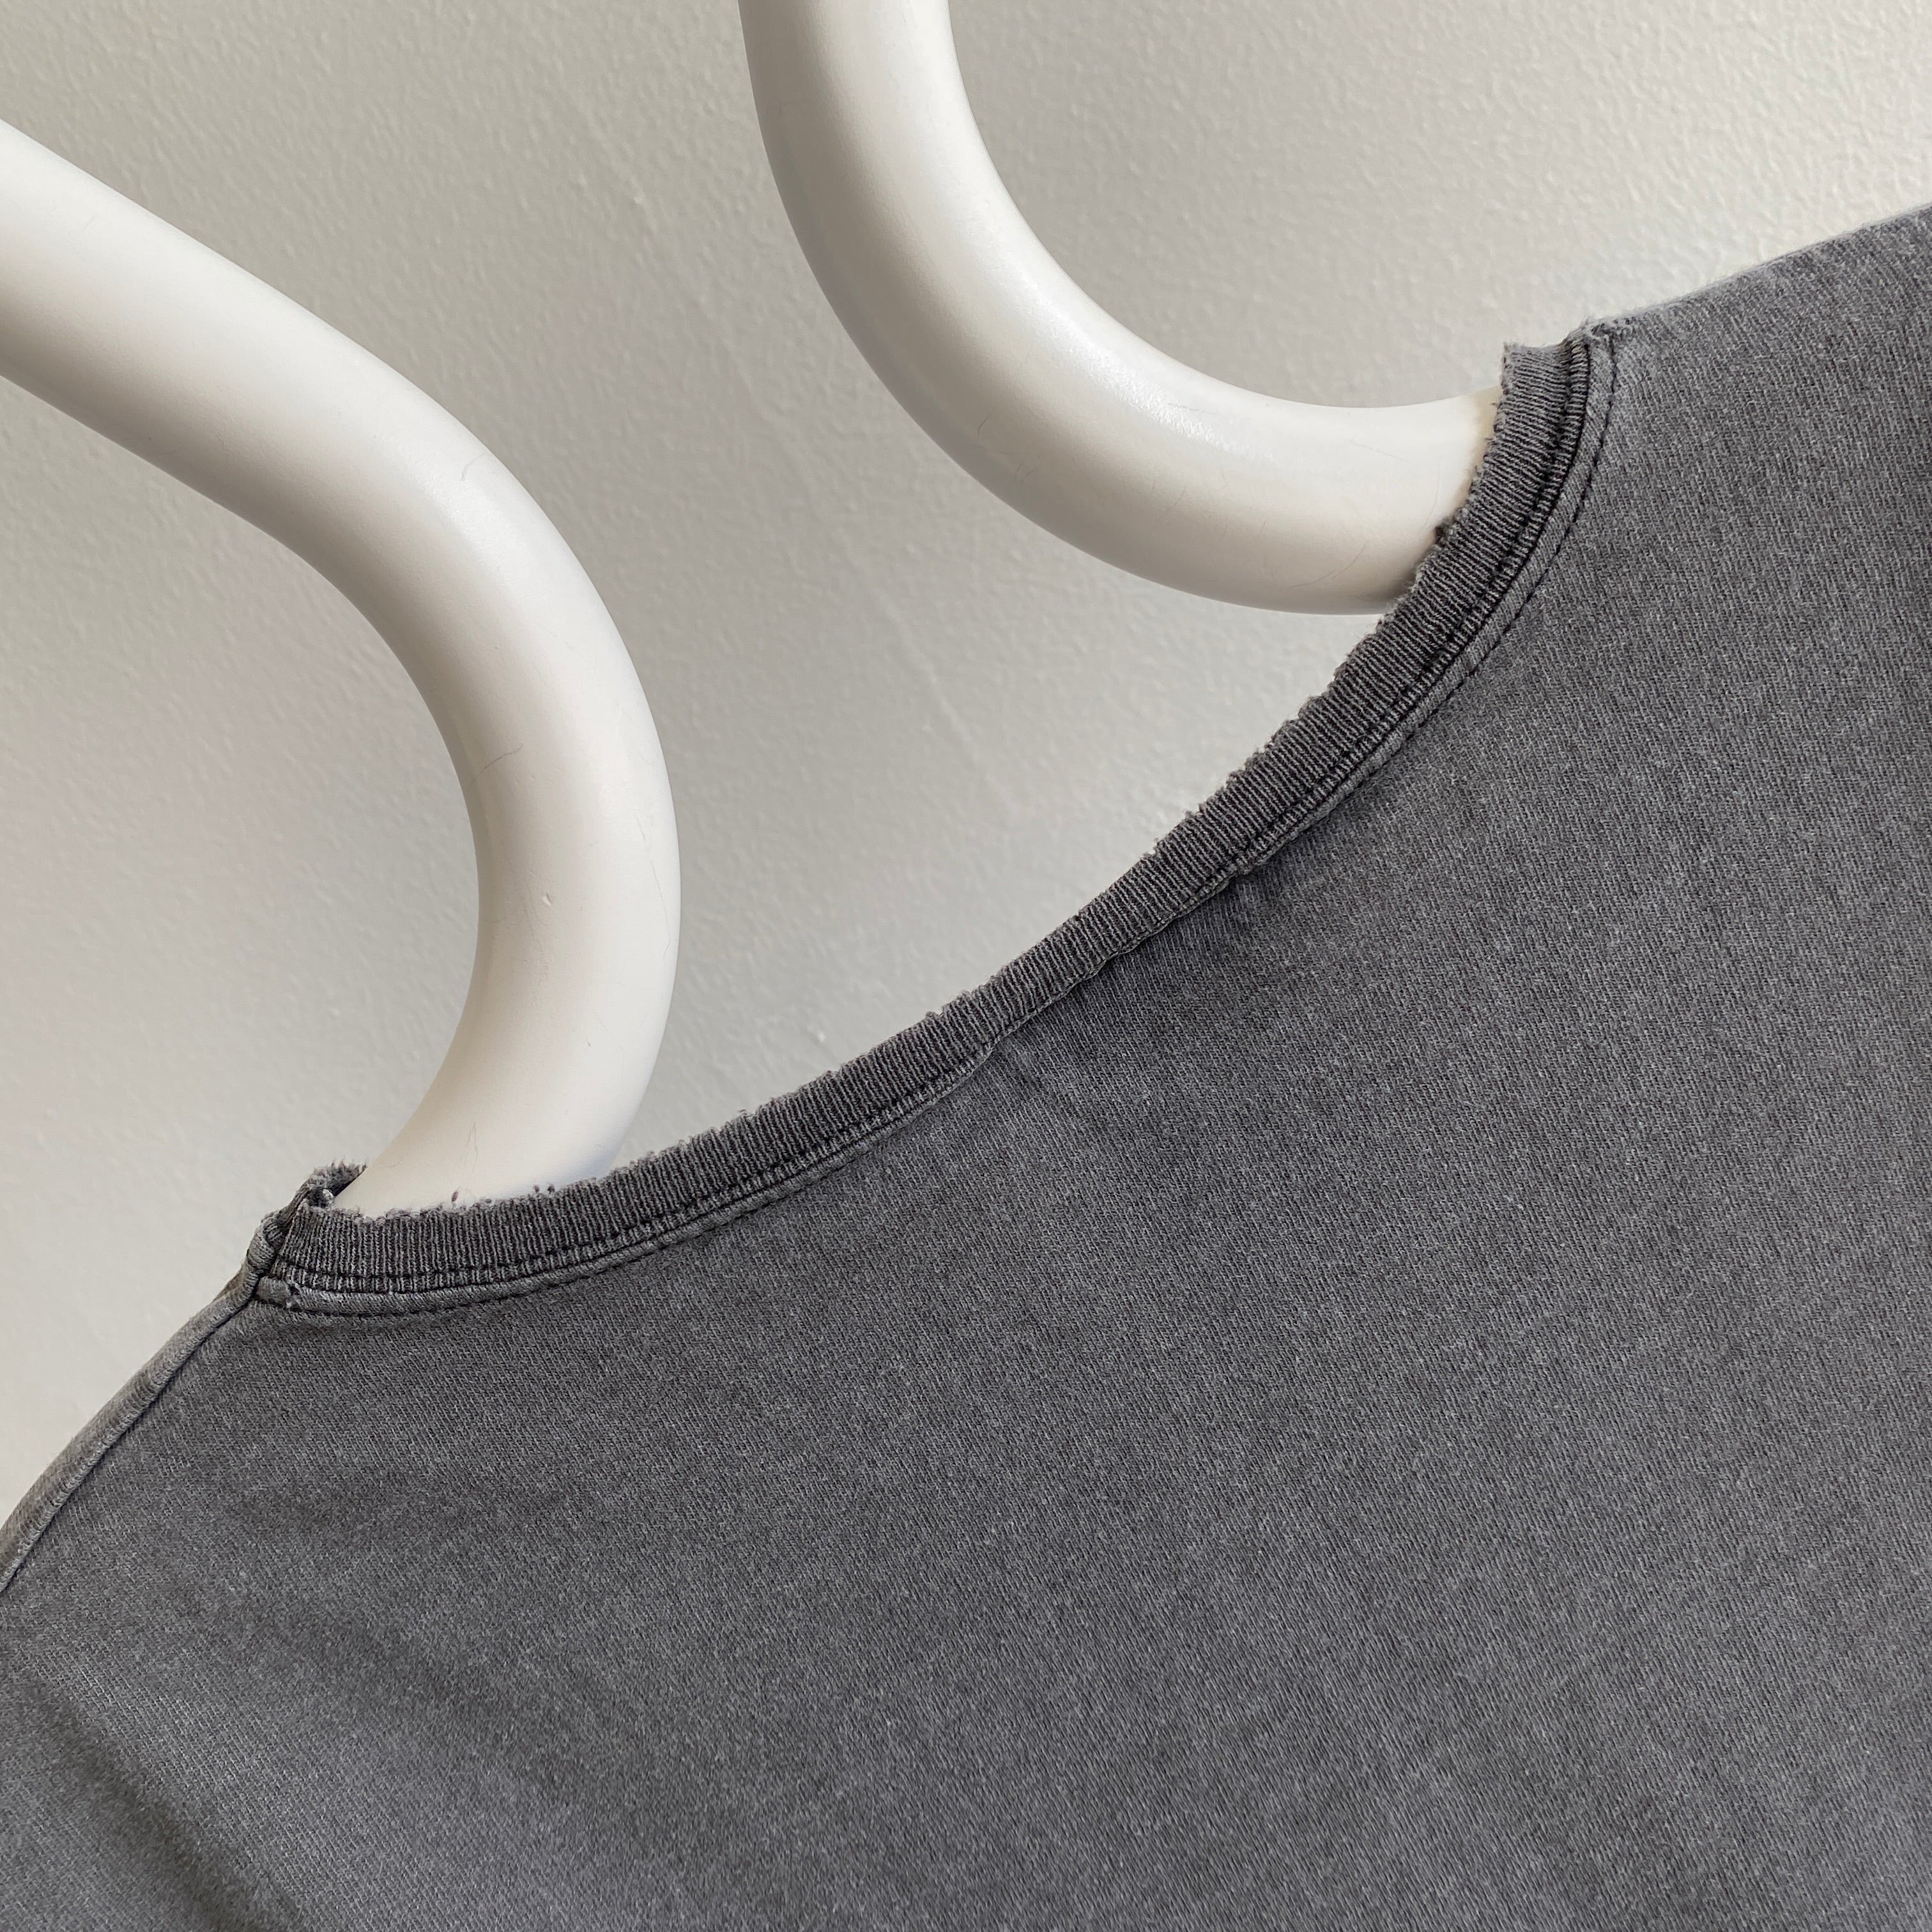 1990s Hanes Her Way Boxy Faded Super Stained Thin Collared Cotton Blank Black To Gray T-Shirt